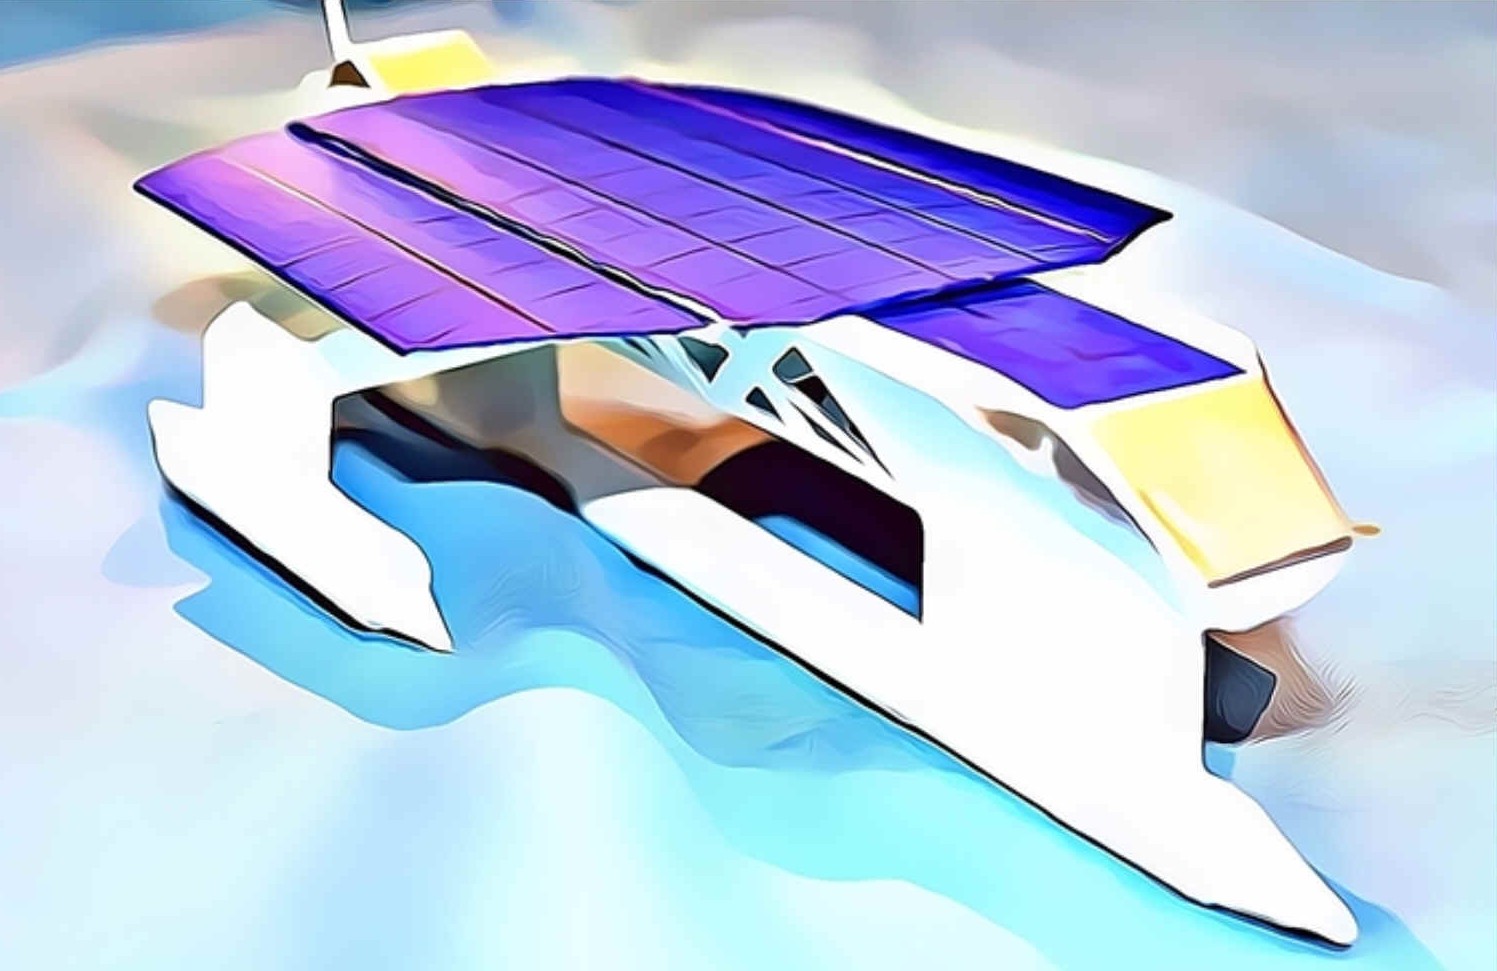 The Elizabeth Swann is the world's fastest solar and wind powered boat